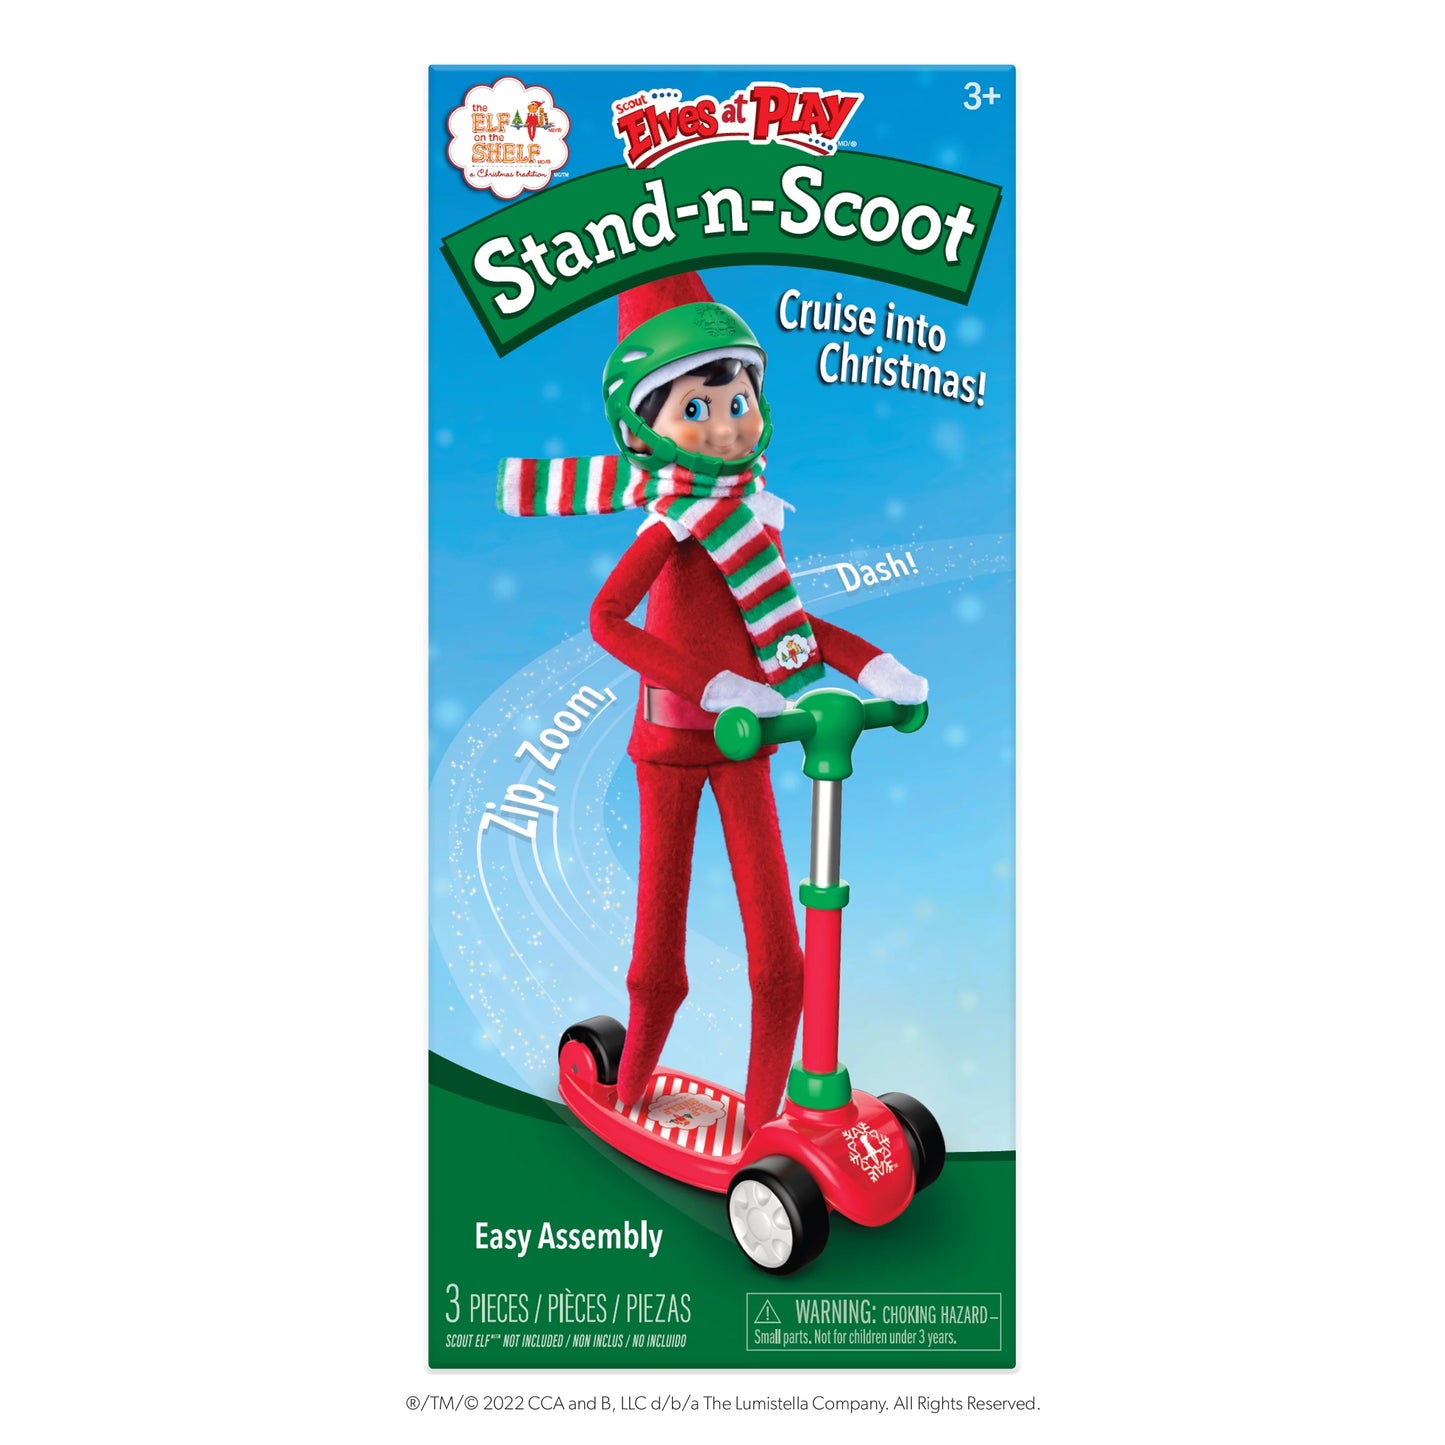 Stand-n- Scoot